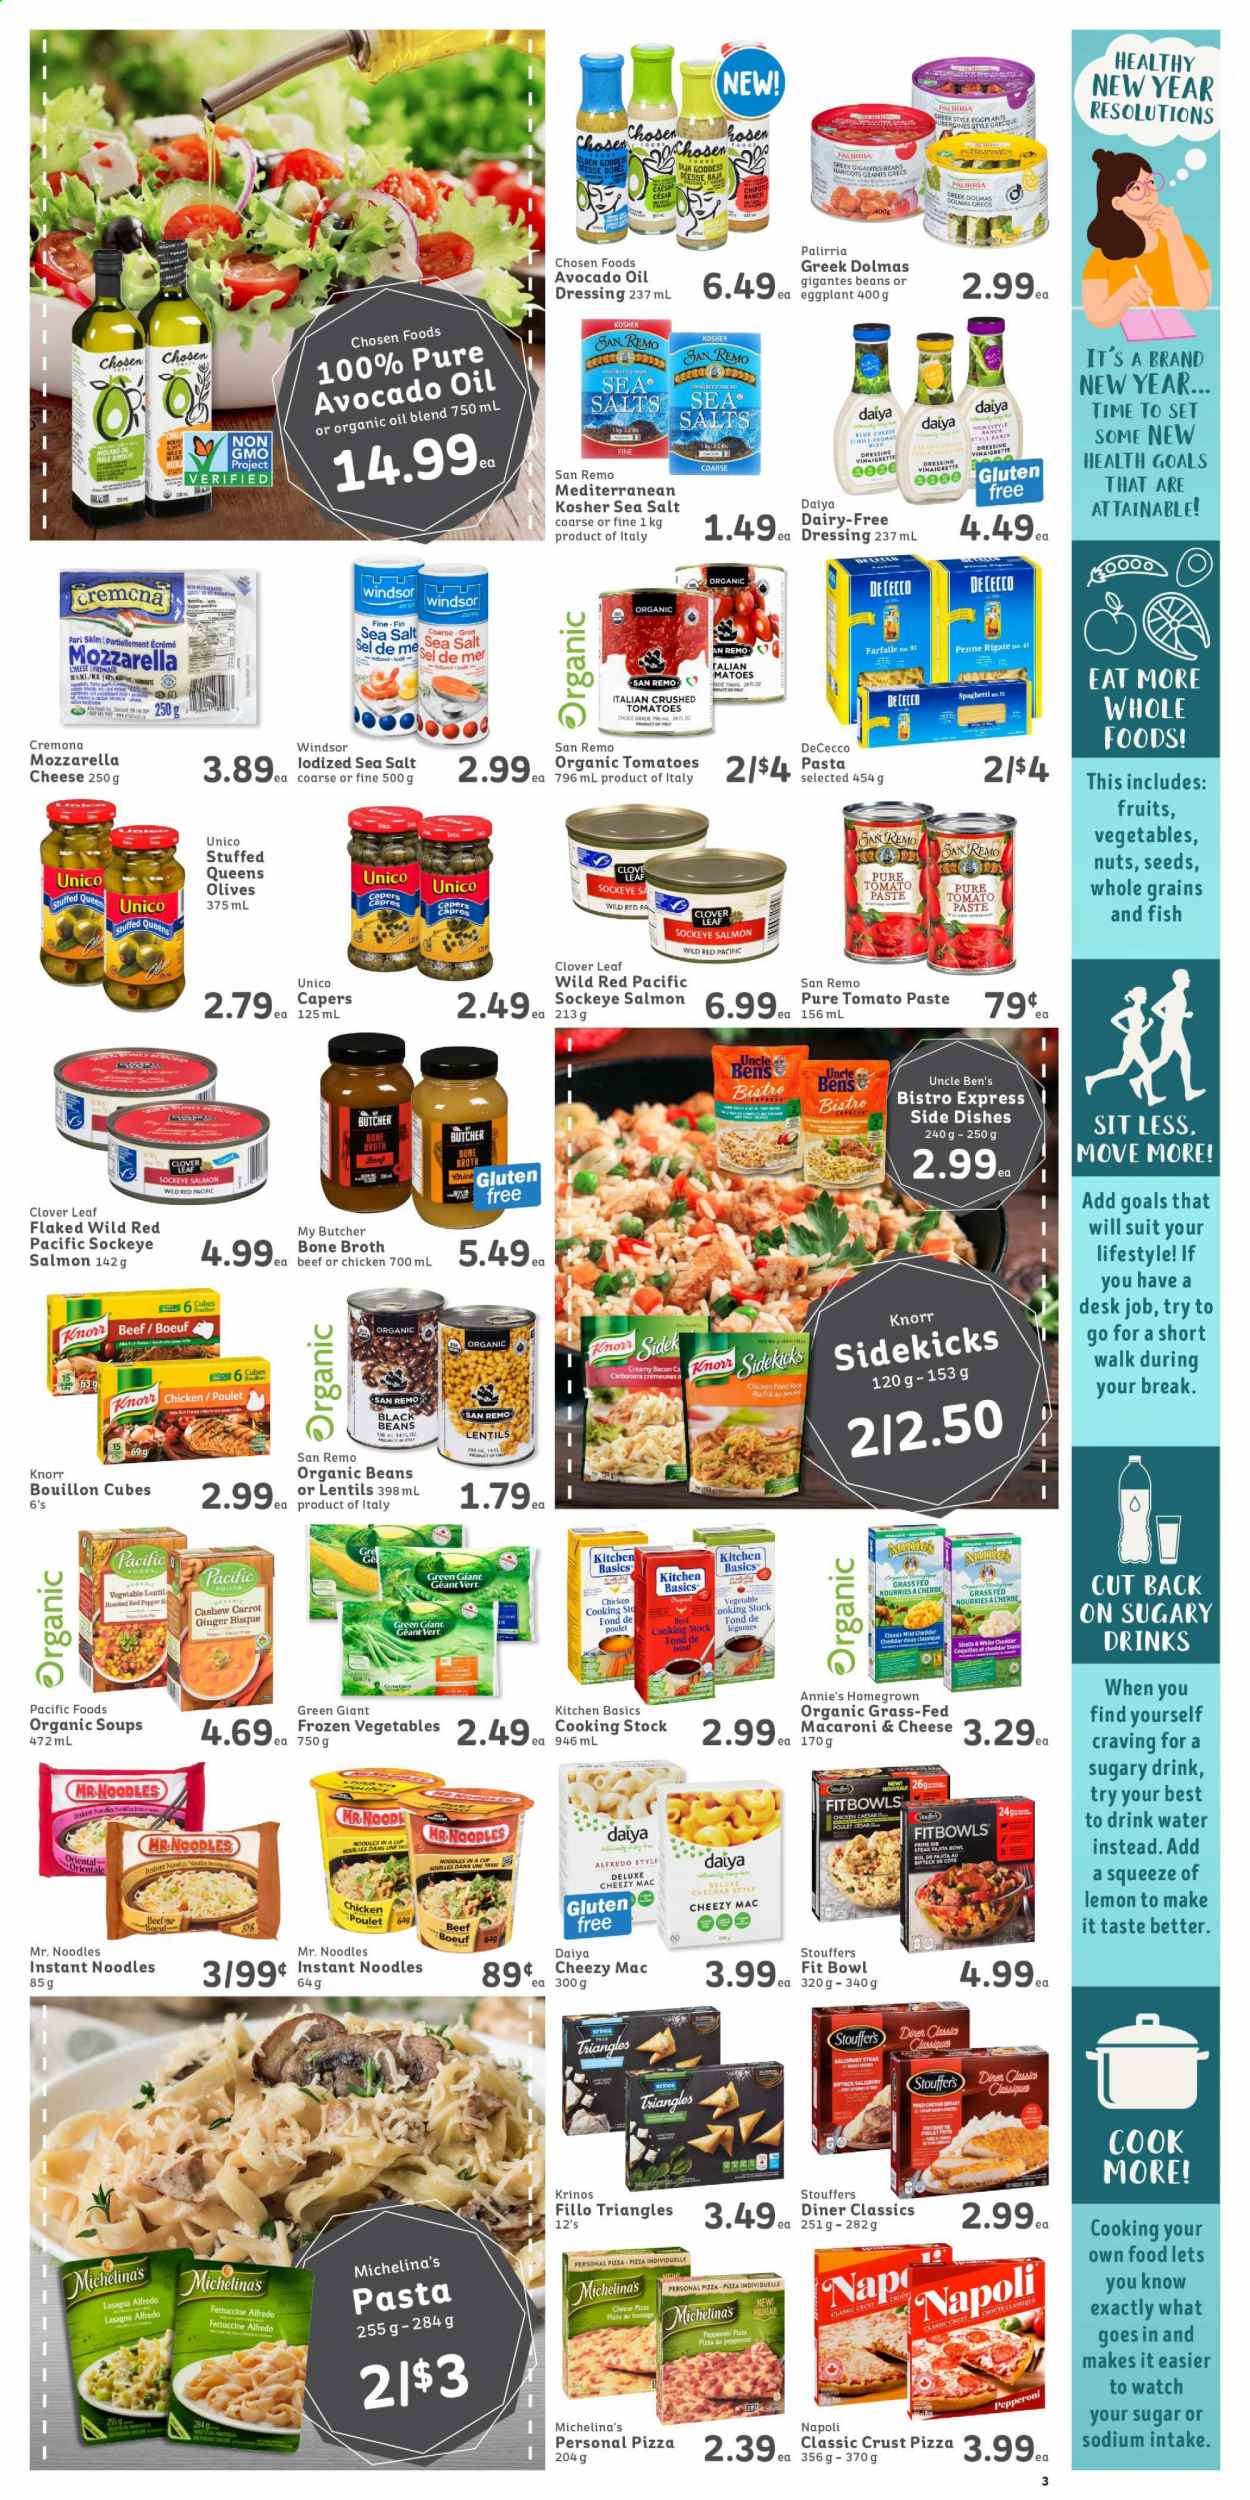 thumbnail - IGA Simple Goodness Flyer - January 08, 2021 - January 14, 2021 - Sales products - Ace, beans, ginger, eggplant, salmon, macaroni & cheese, spaghetti, pizza, pasta, instant noodles, fried chicken, fajita, noodles, lasagna meal, Annie's, bacon, pepperoni, mild cheddar, Clover, frozen vegetables, Stouffer's, bouillon, sugar, sea salt, broth, black beans, capers, crushed tomatoes, lentils, tomato paste, Uncle Ben's, penne, cloves, vinaigrette dressing, dressing, avocado oil, oil, Knorr, olives, steak. Page 3.